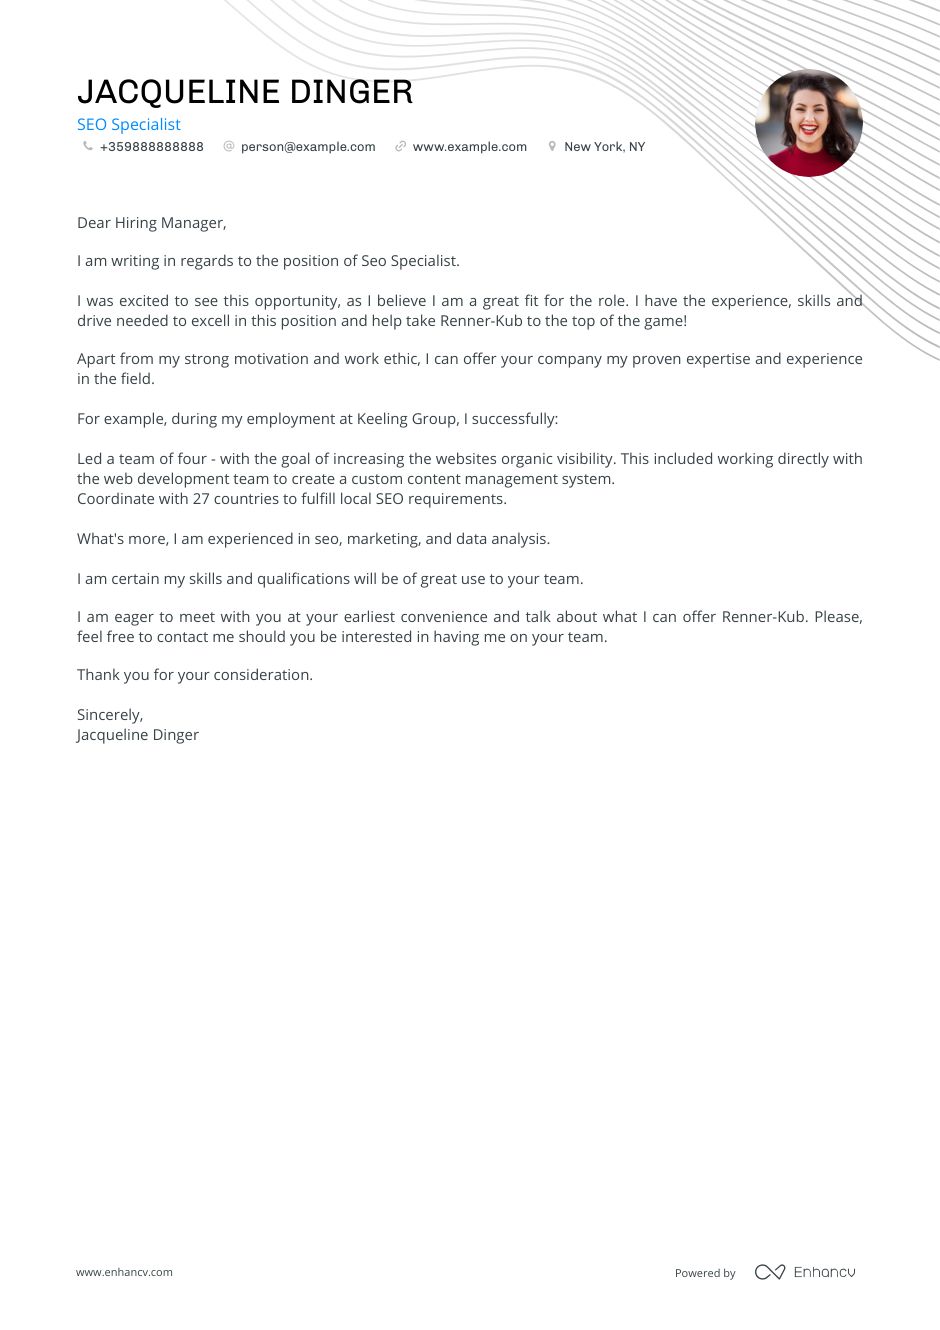 seo-specialist-coverletter.png